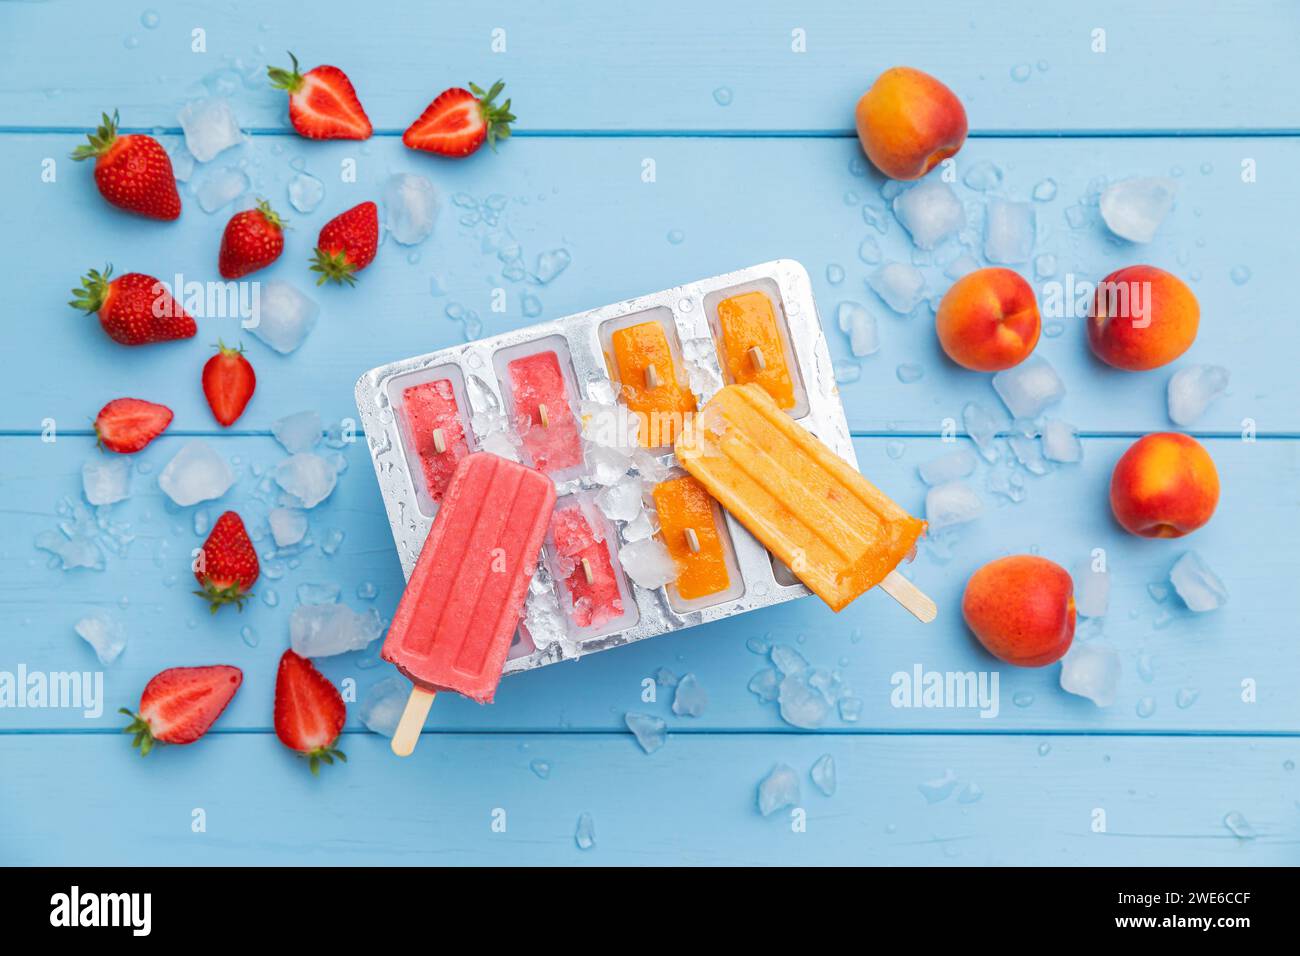 Studio shot of homemade strawberry and apricot flavored ice Stock Photo